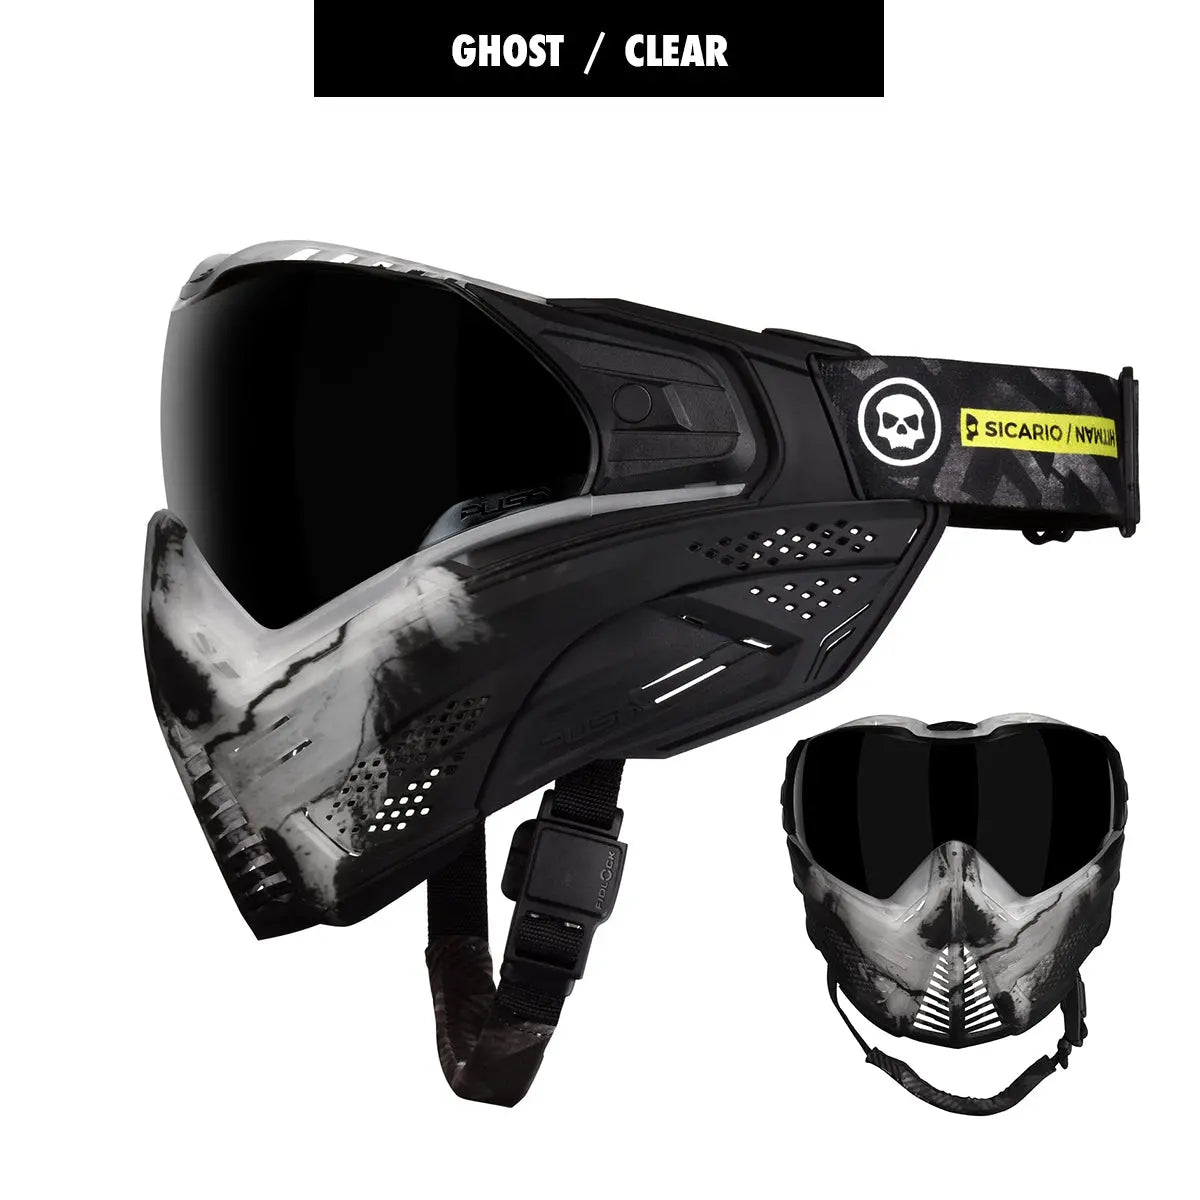 INFAMOUS &quot;CLEAR&quot; GHOST SKULL LE UNITE PUSH GOGGLE Push Paintball